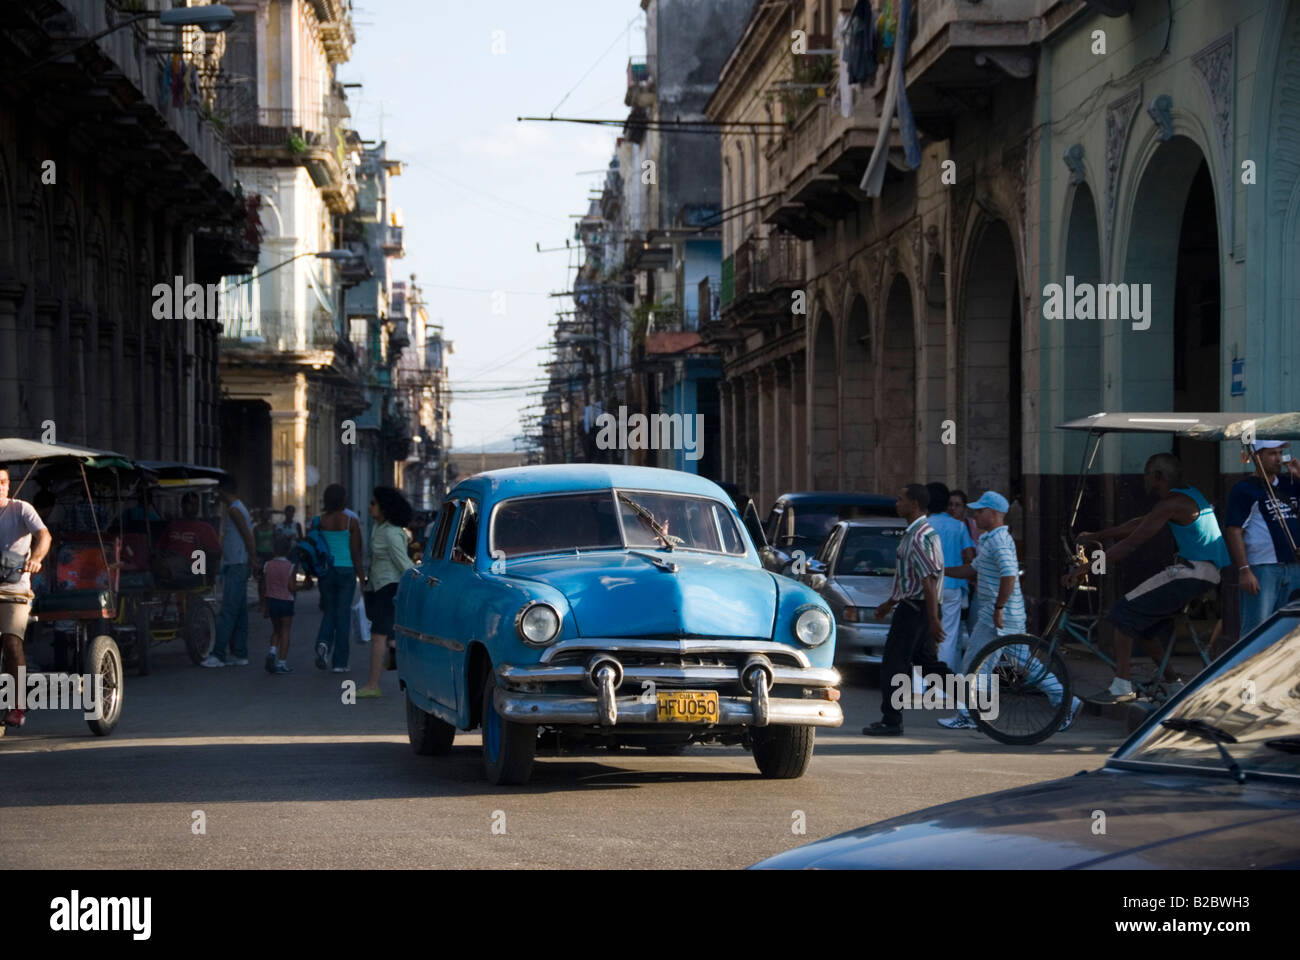 Busy street scene with old Amercan vintage car and colonial architecture in La Habana Vieja Havana Cuba Stock Photo